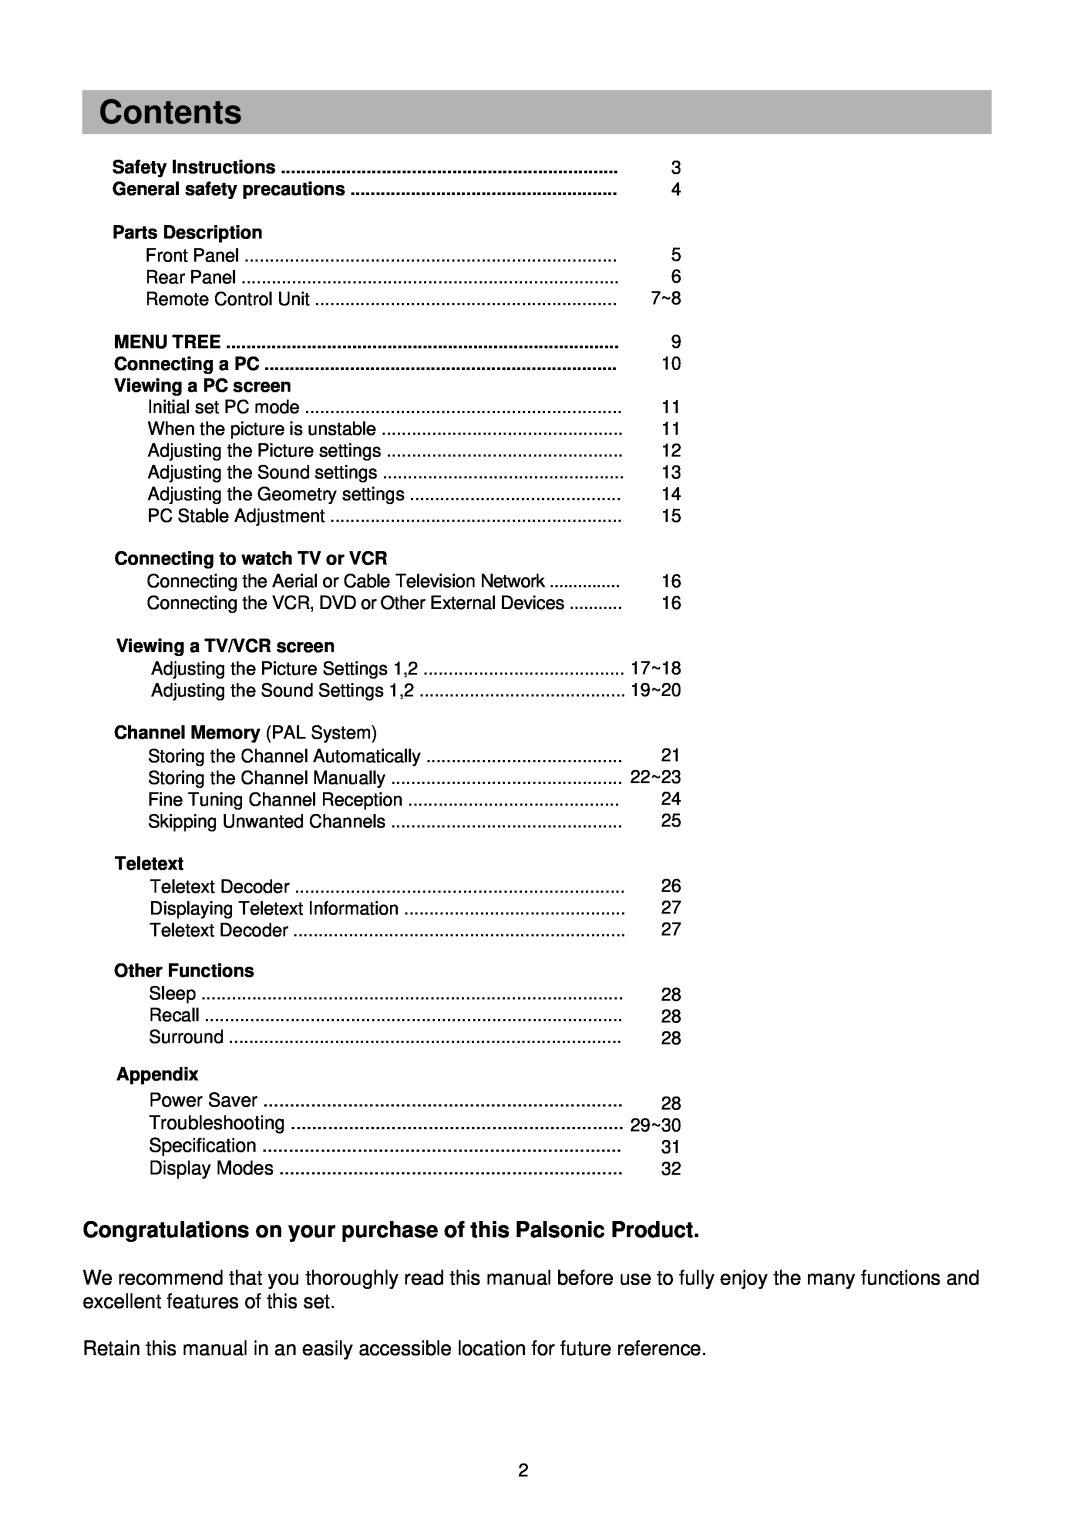 Palsonic TFTV-201 owner manual Contents, Congratulations on your purchase of this Palsonic Product 